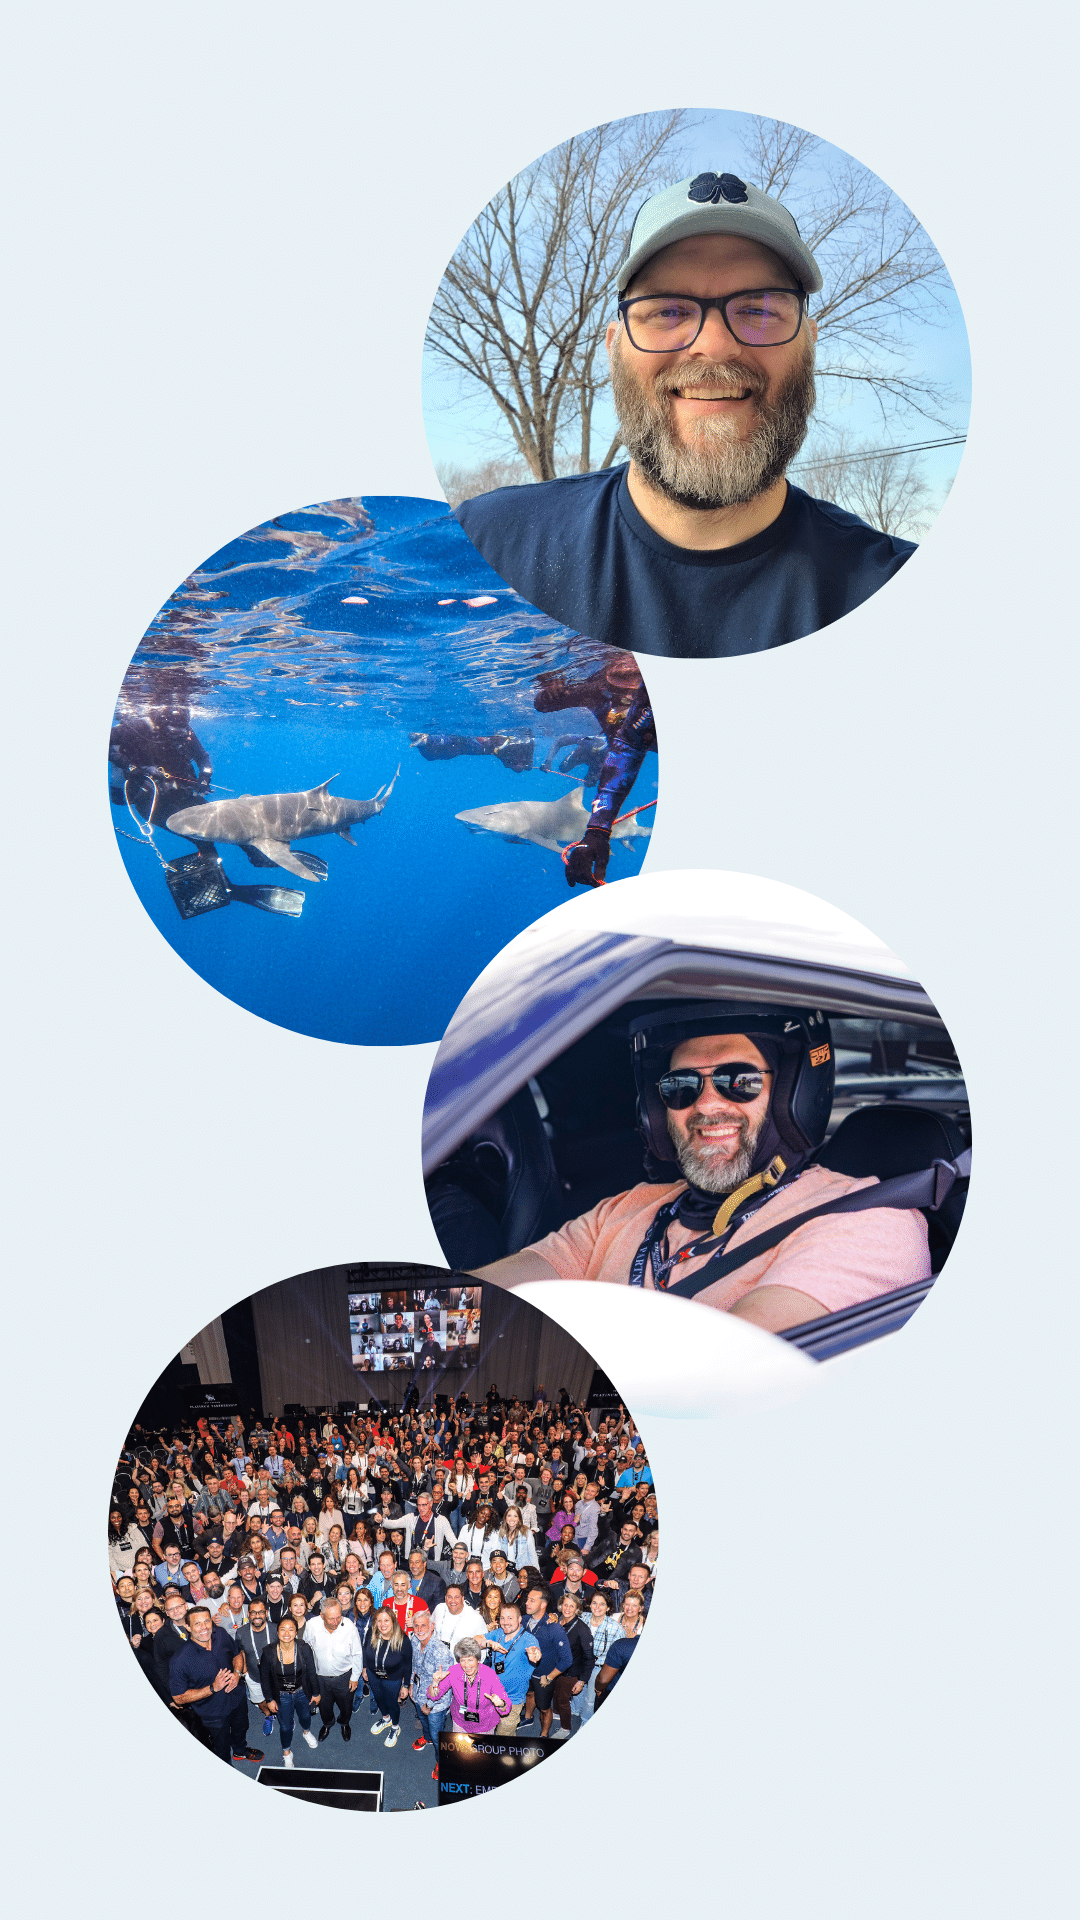 Collage of Darryl Langeness smiling, swimming with sharks, and driving a race car, representing his diverse experiences.